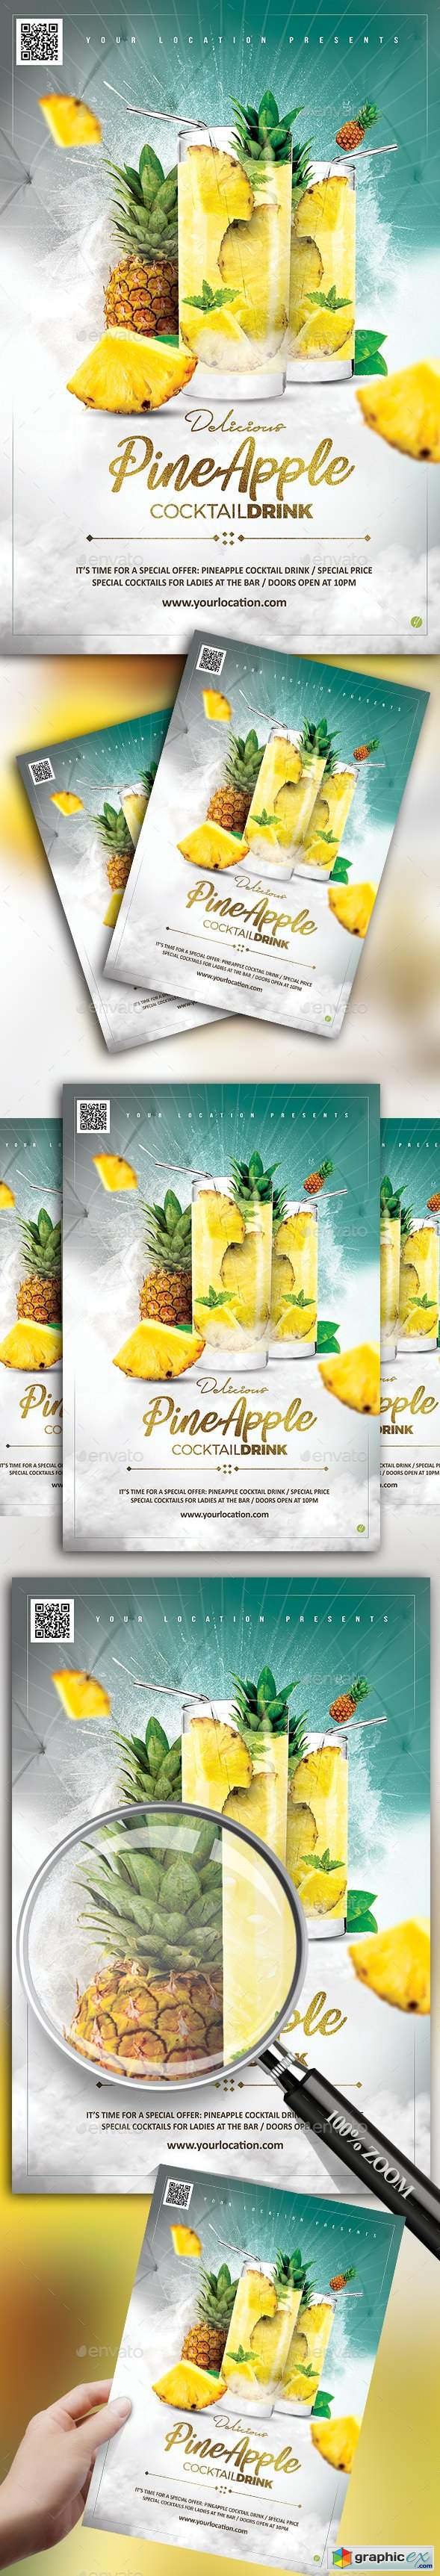 Pineapple Cocktail Drink Flyer